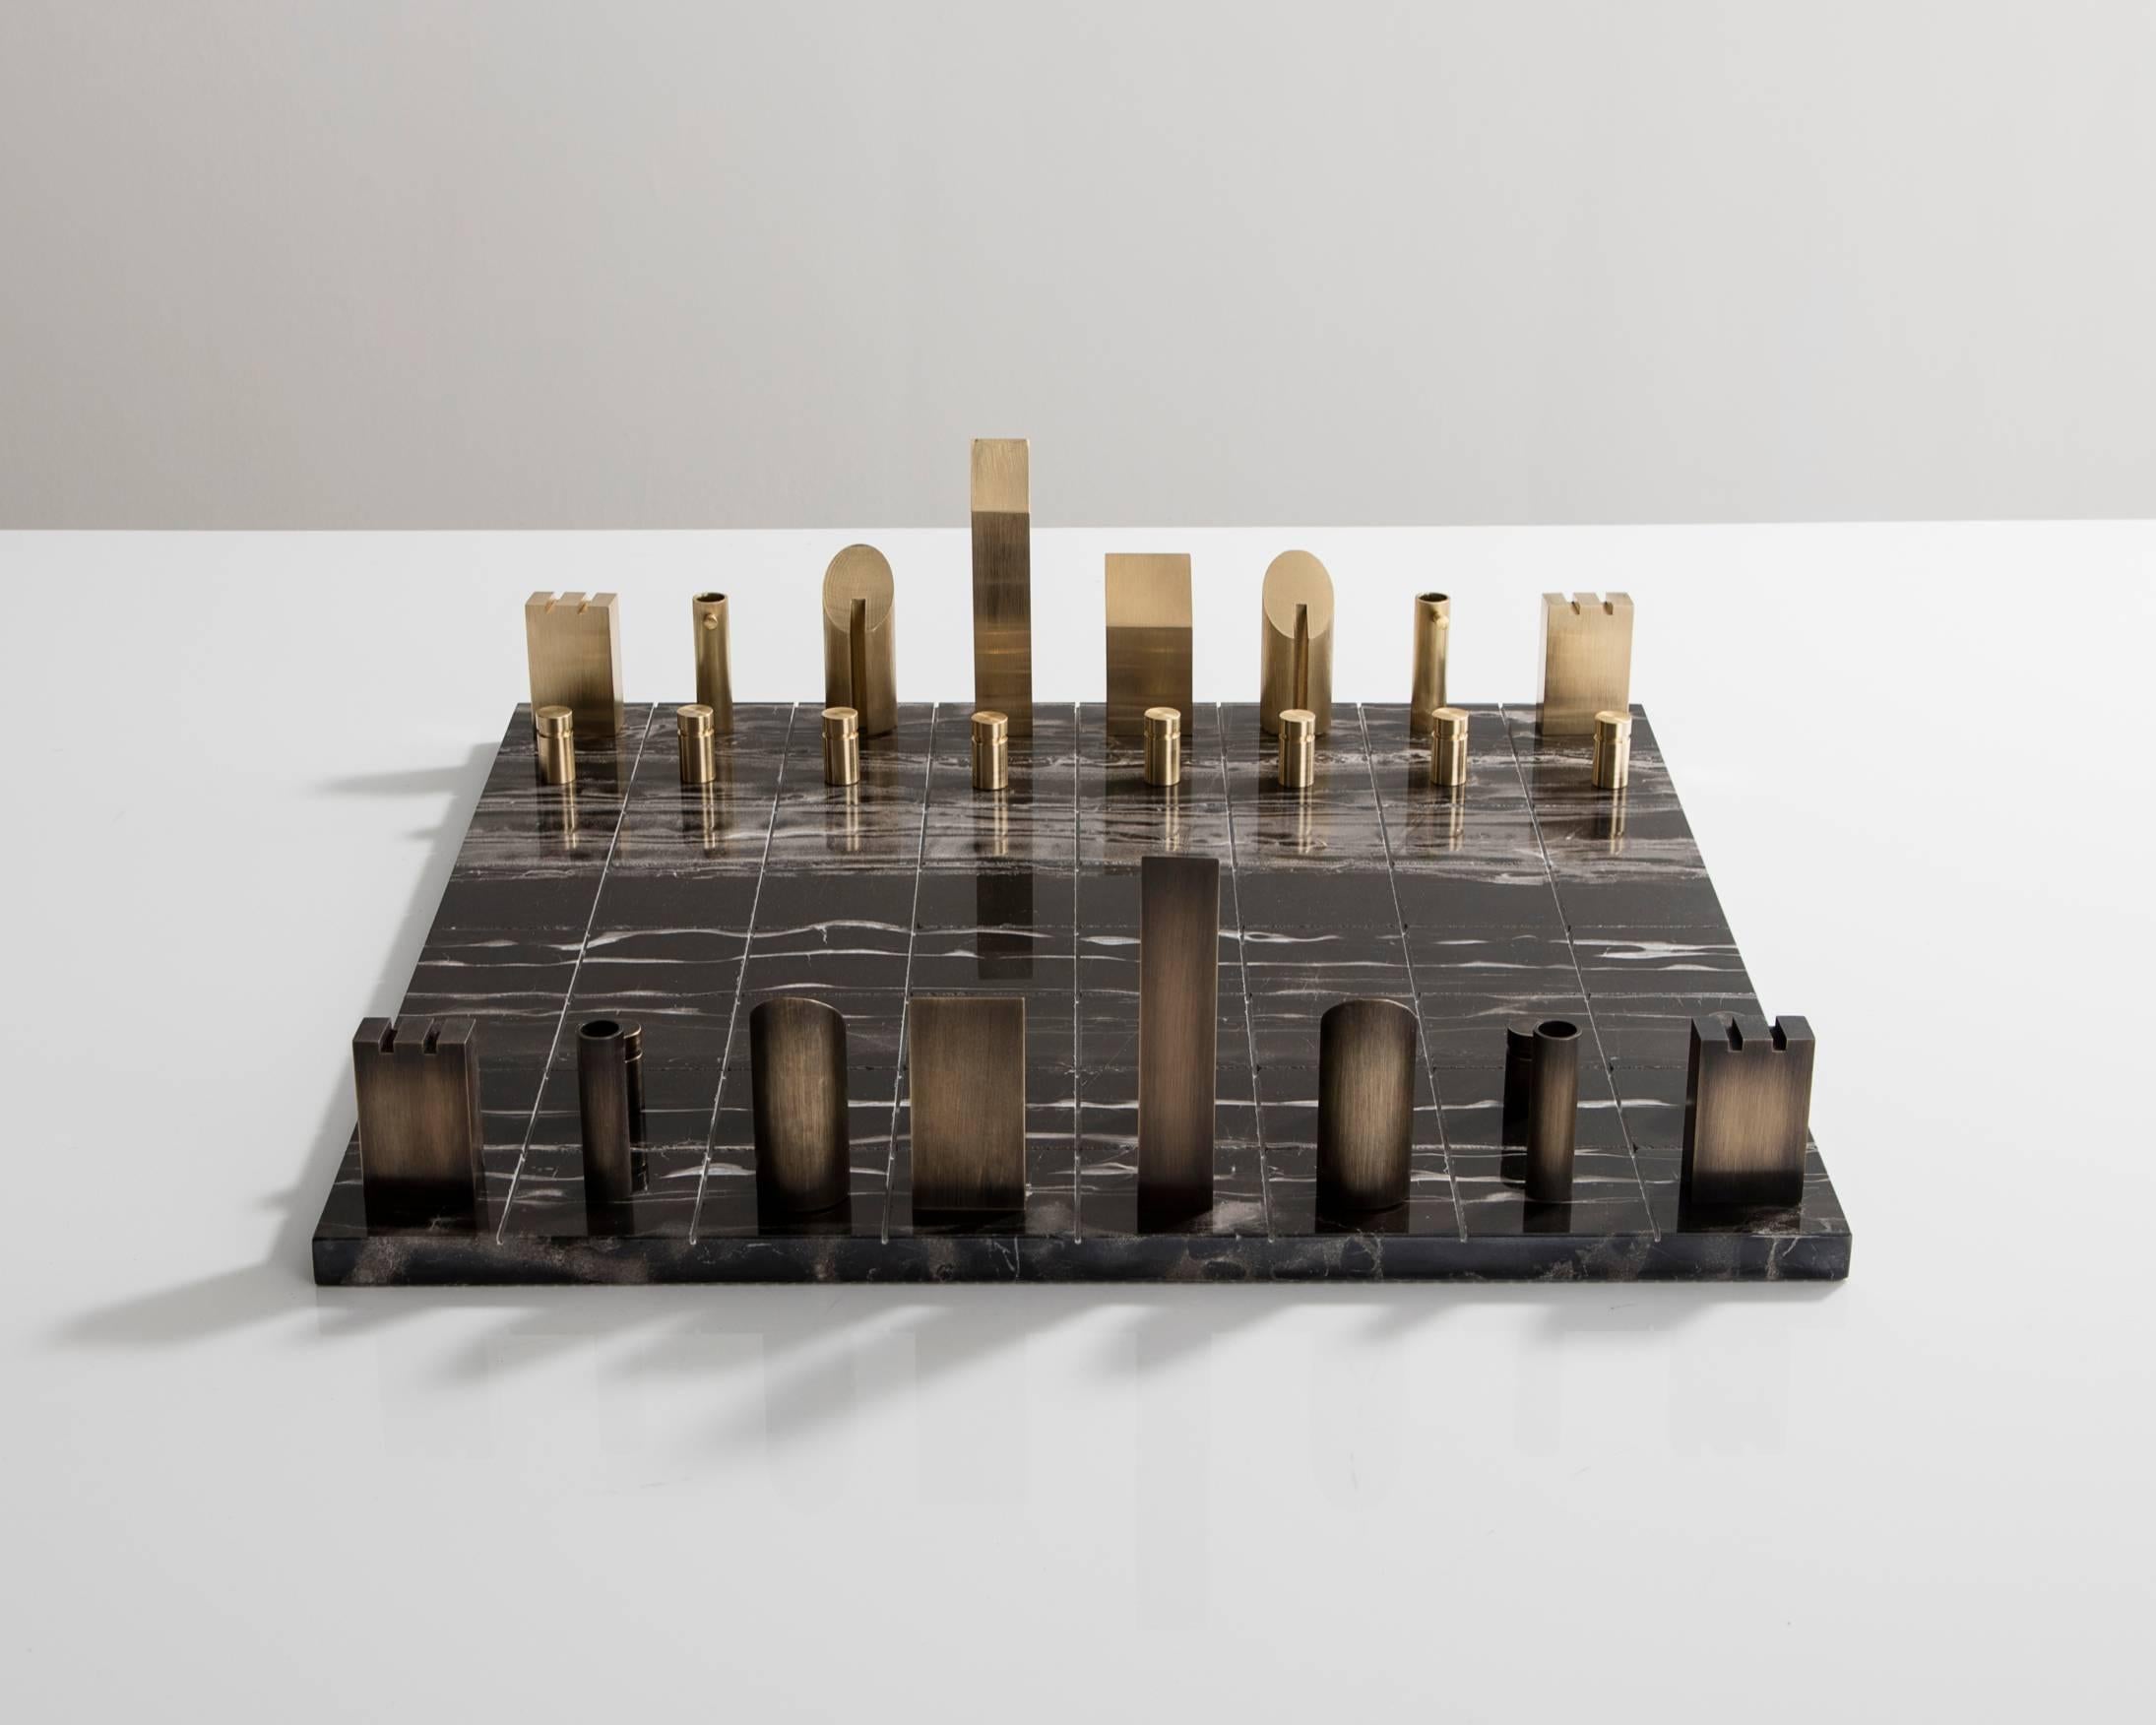 Chess set in polished and patinated bronze. Designed and handmade by Gabrielle Shelton, USA, 2016.